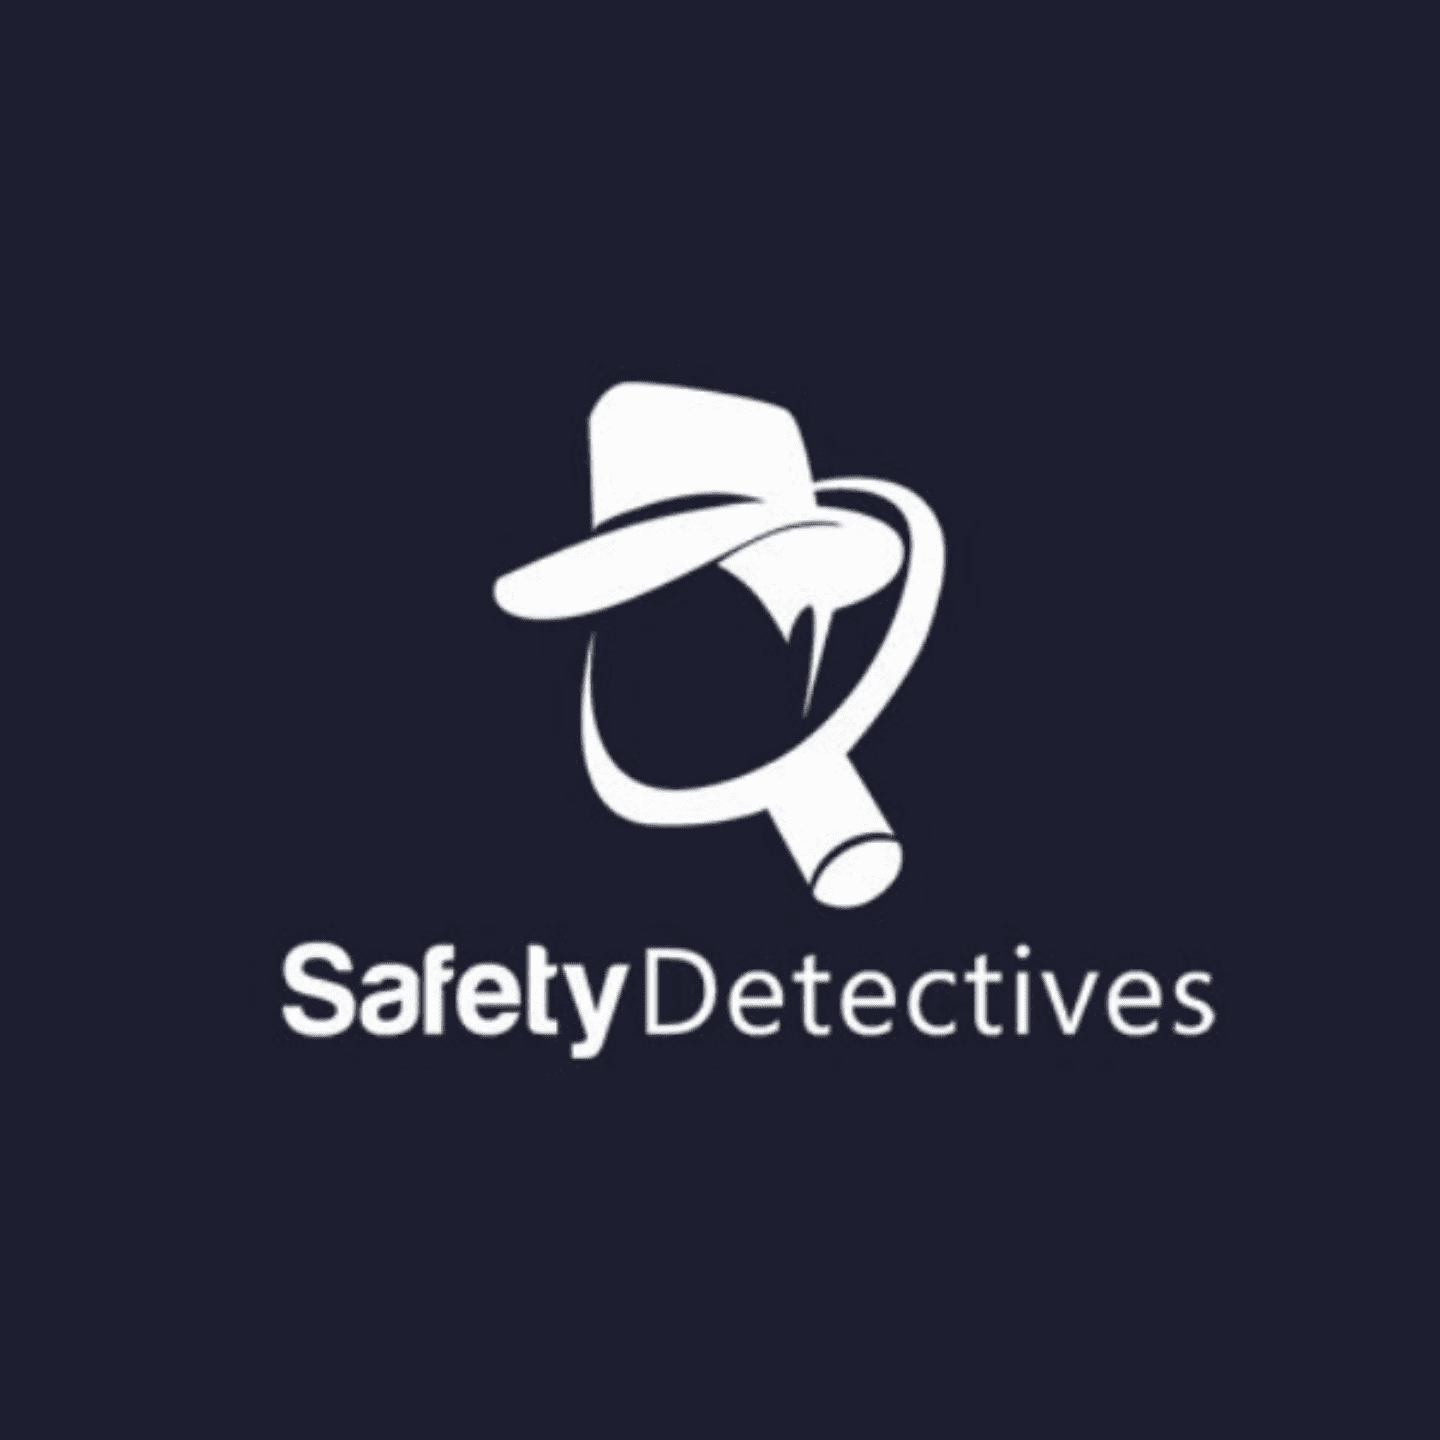 Safety Detectives